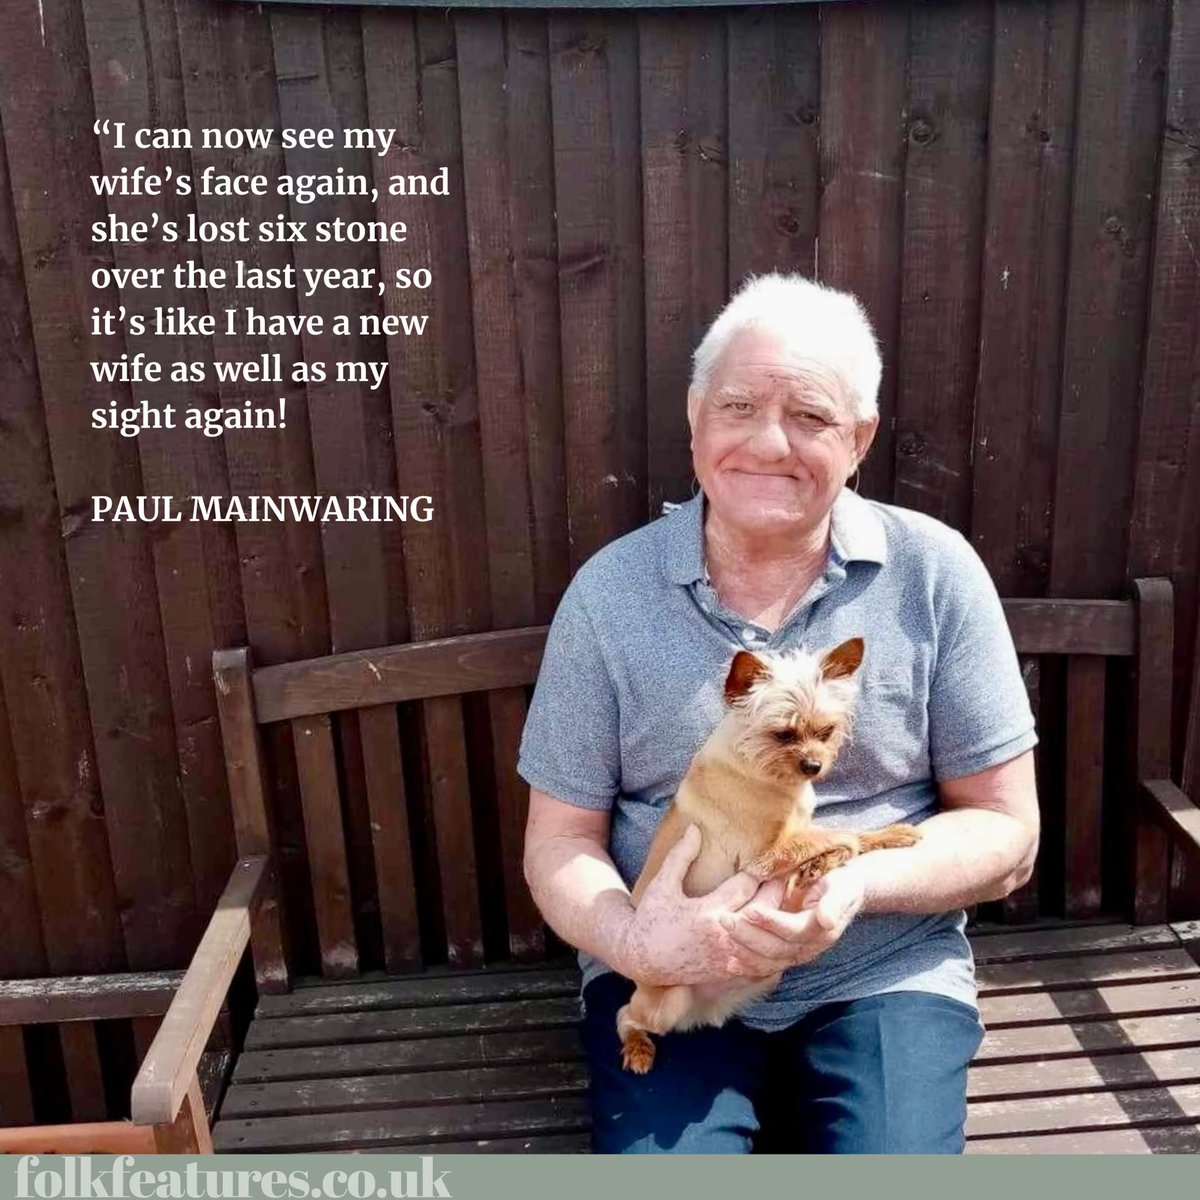 🌟 Find out how Paul Mainwaring got his sight back, thanks to Mr Chrishan Gunasekera, Consultant Ophthalmologist at @NNUH 

folkfeatures.co.uk/how-paul-got-h…

#positivenews #Norwich #Norfolk #folkfeatures